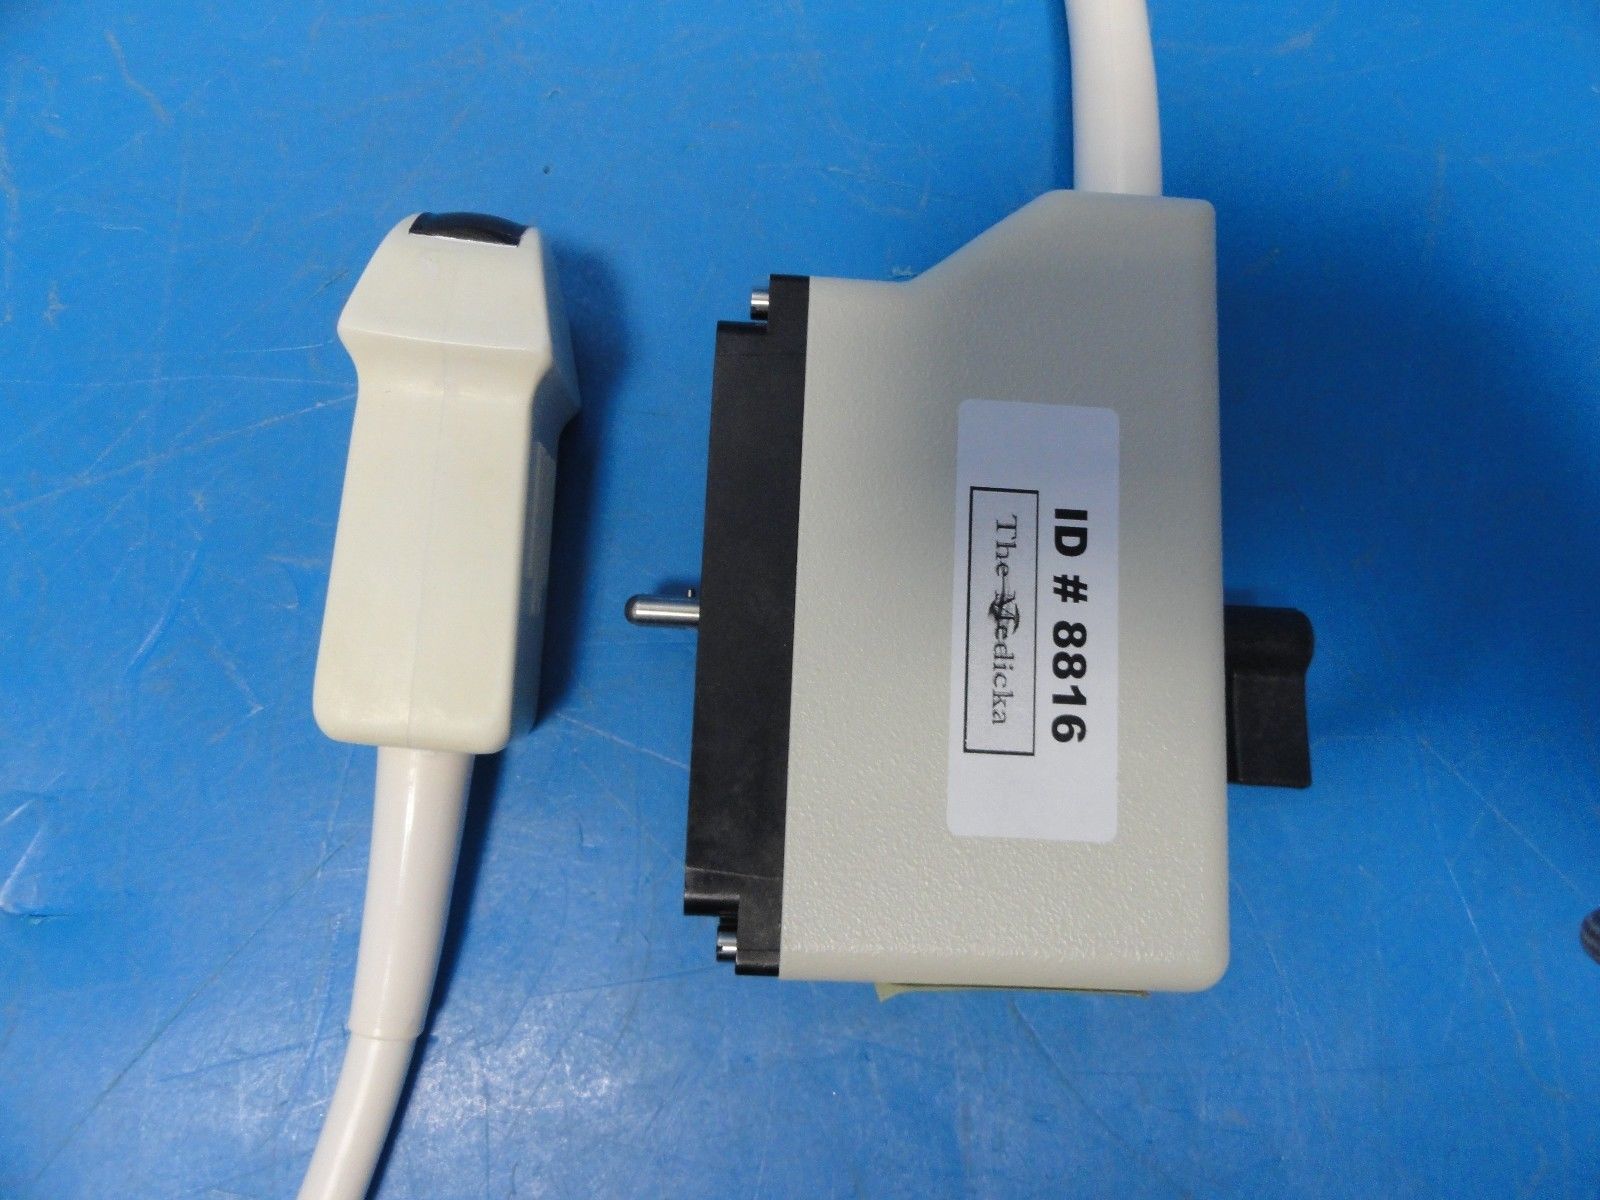 2005 Diasonics 5.0 CPACurved Phased Array Probe  for Gateway (8816) DIAGNOSTIC ULTRASOUND MACHINES FOR SALE